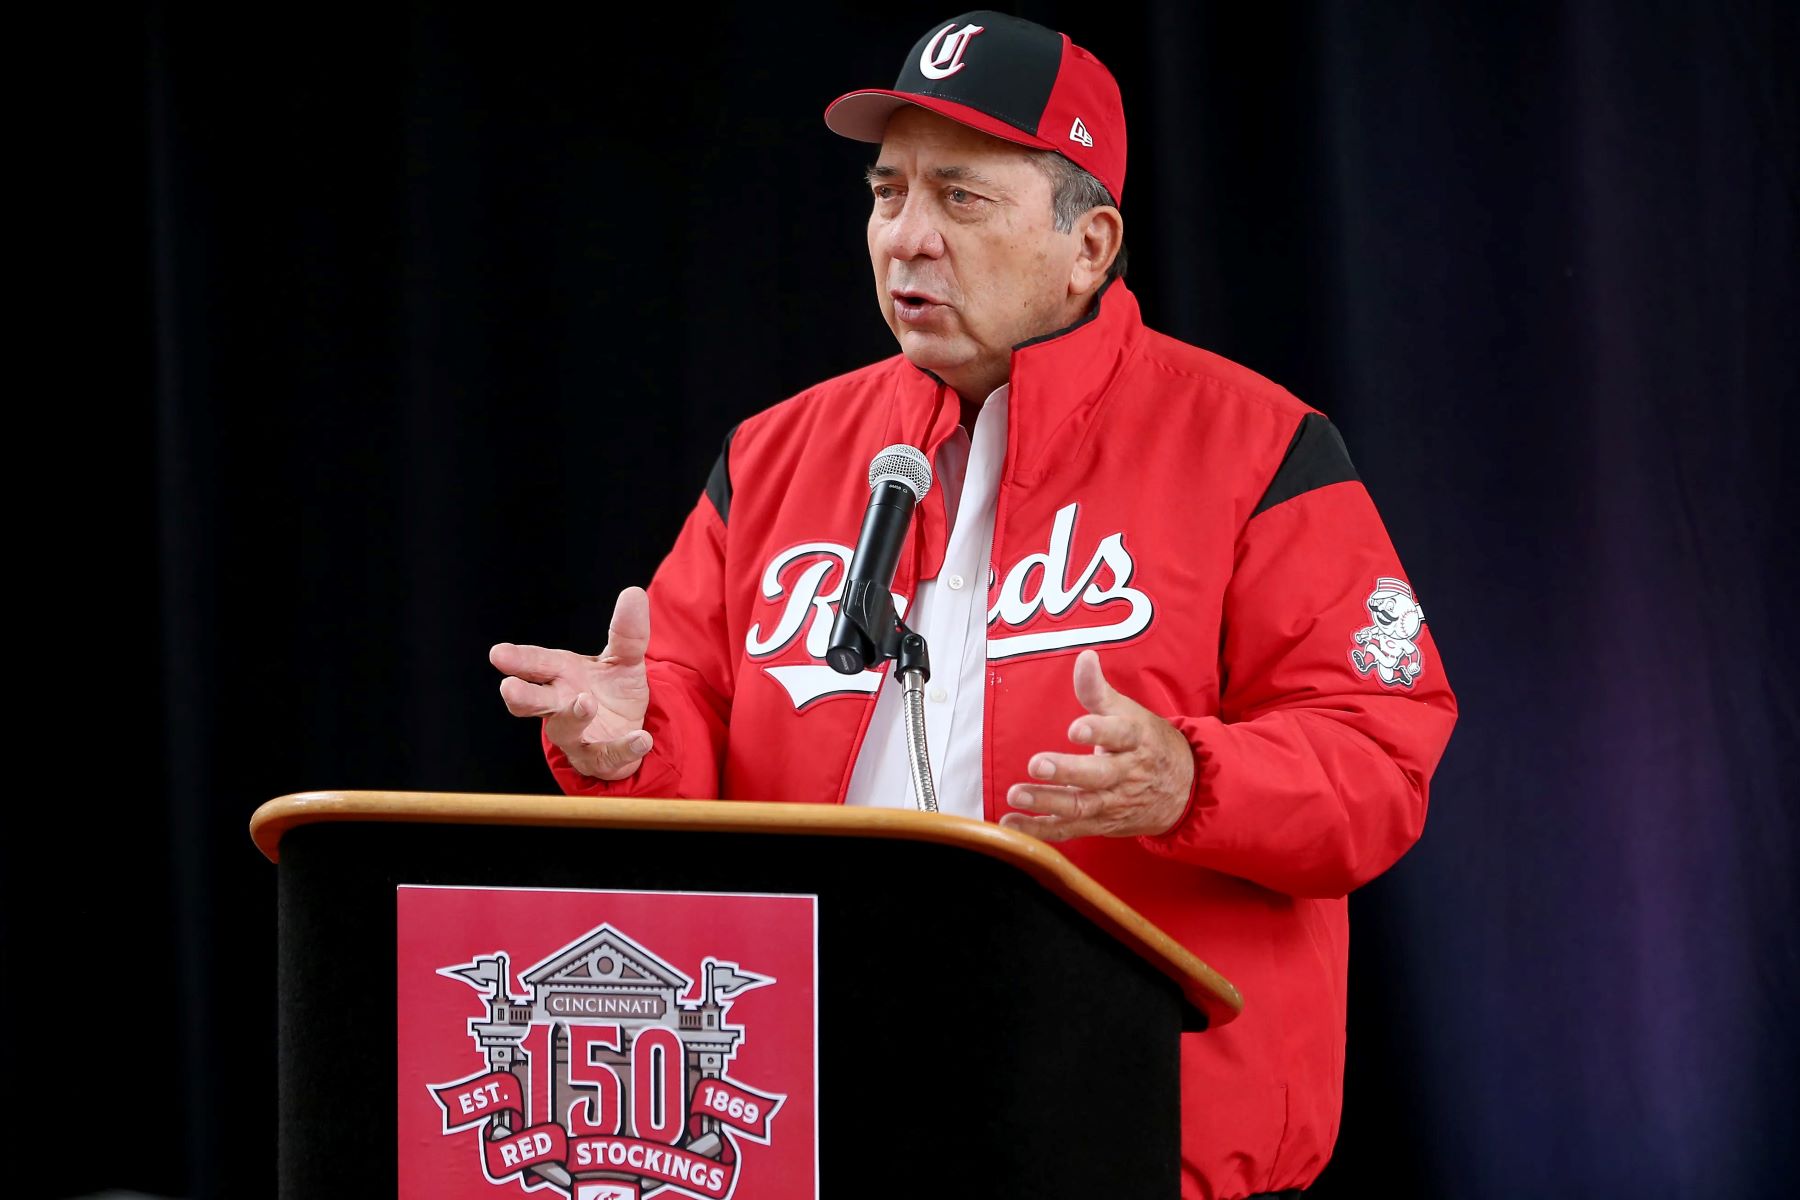 Johnny Bench MLB Career and Early Life